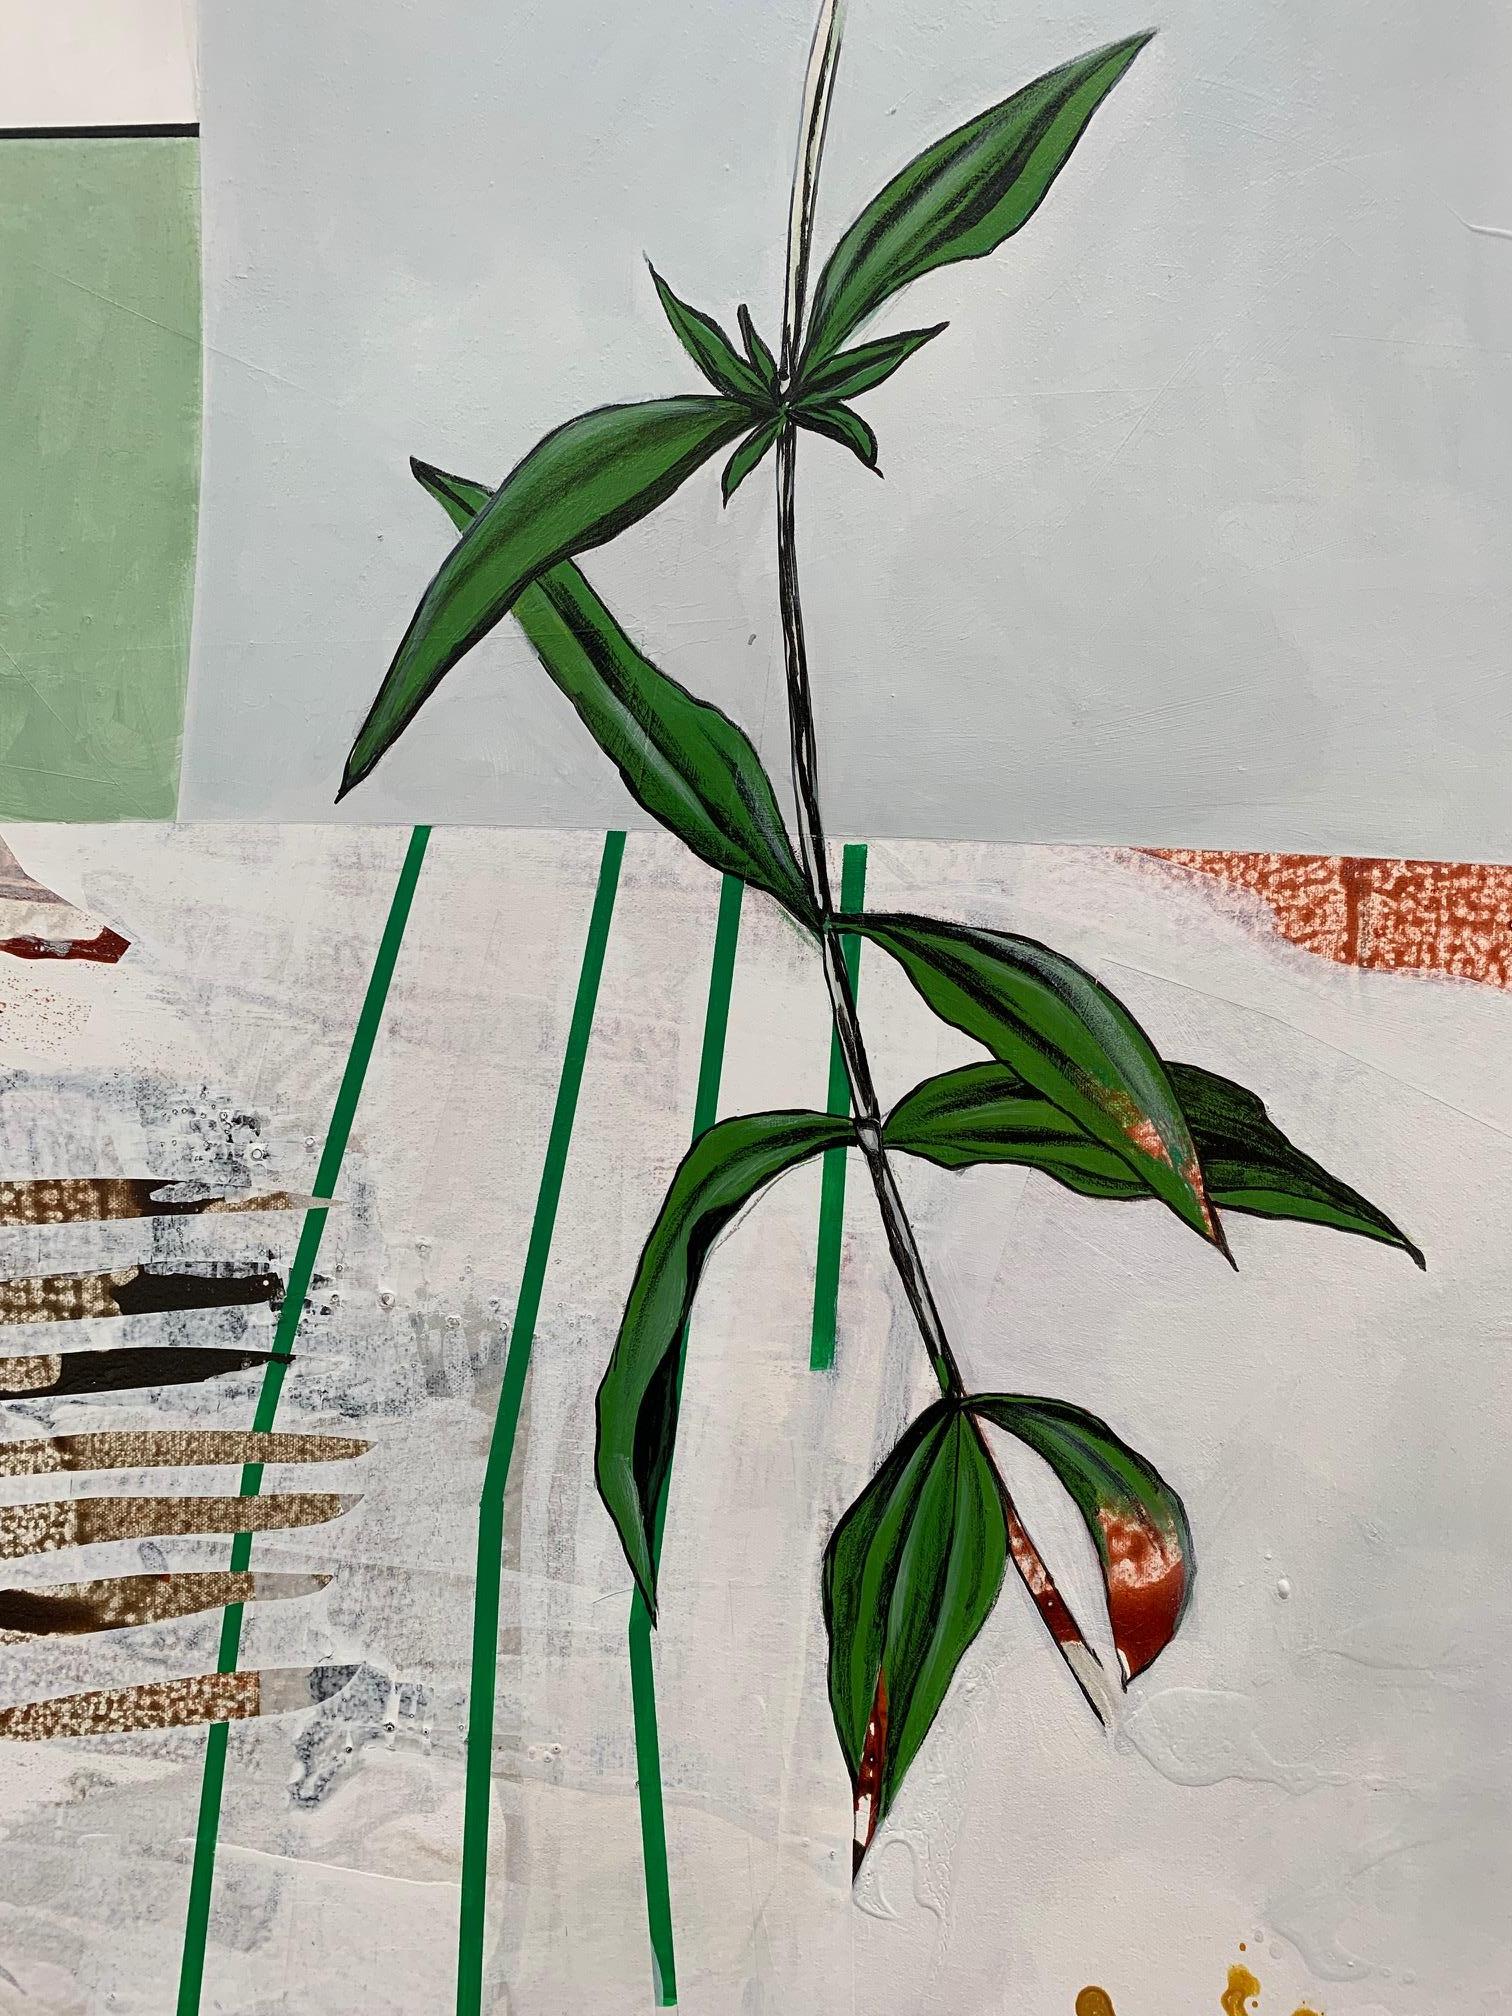 This contemporary, abstract, pastel coloured painting, explores botanical research illustrations by layering and collaging various elements like foliage, and geometric shapes.

Fiona Ackerman’s work is diverse in style, it is deeply rooted in the